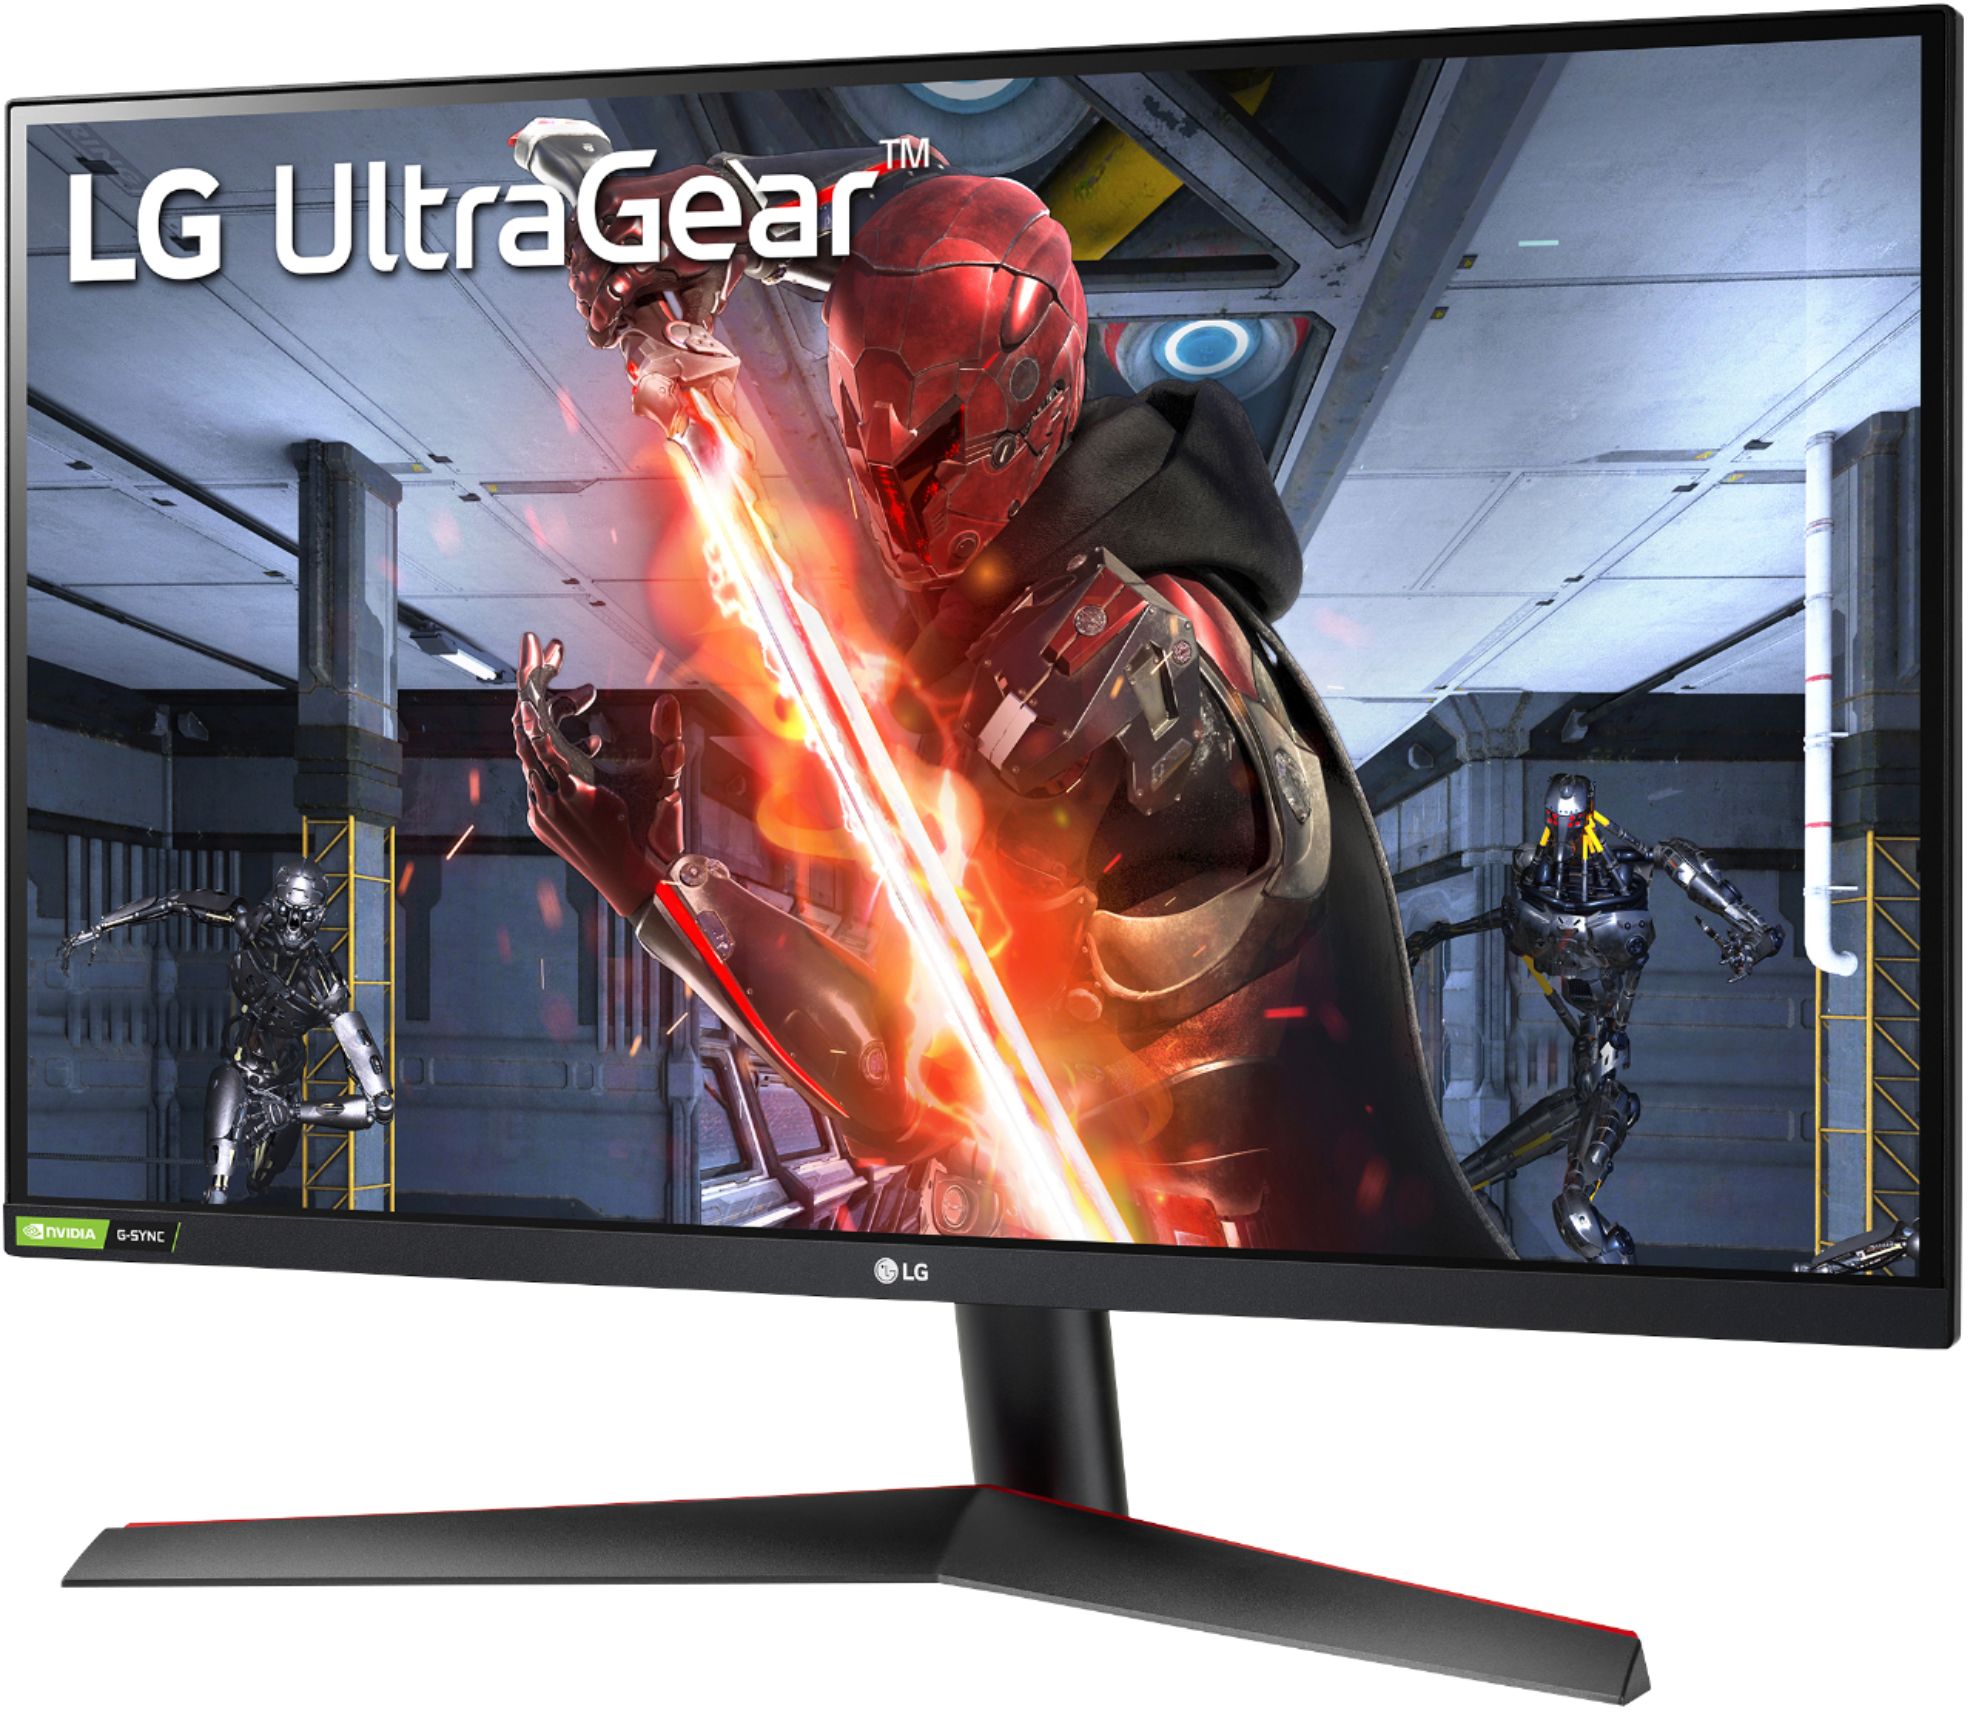 LG - 27” UltraGear QHD IPS Gaming Monitor with G-SYNC Compatibility - Black